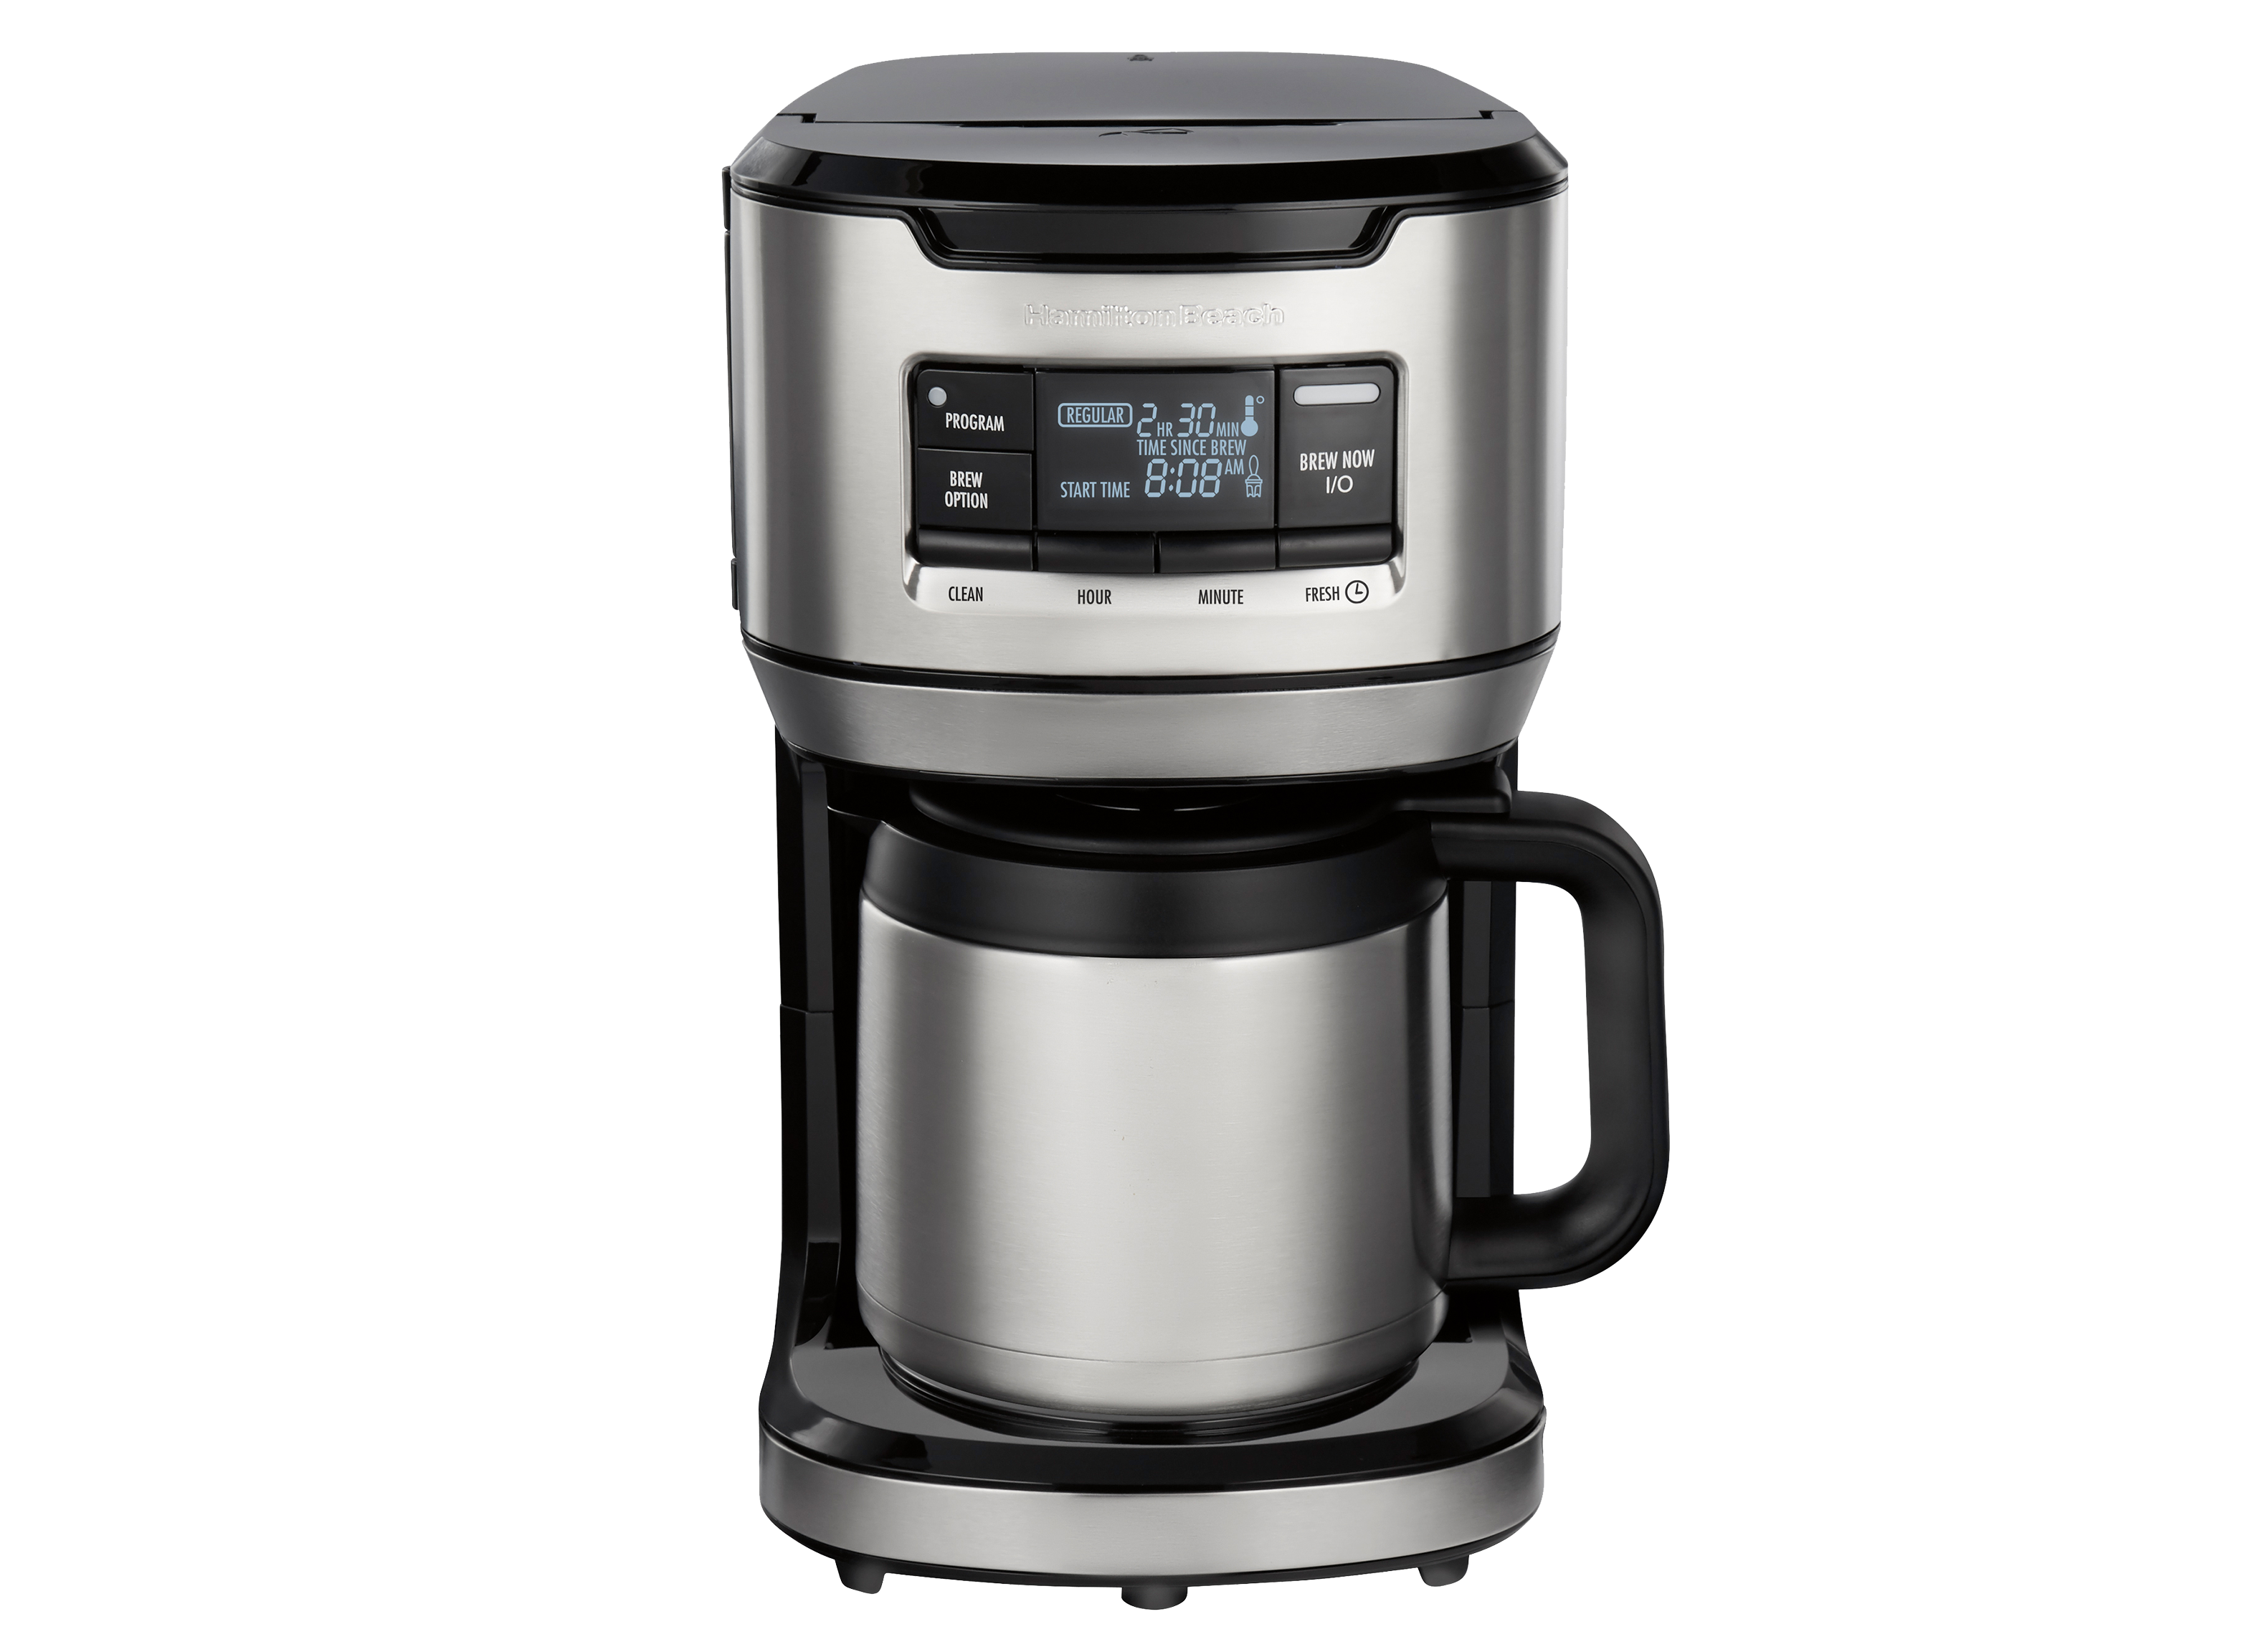 https://crdms.images.consumerreports.org/prod/products/cr/models/401342-drip-coffee-makers-with-carafe-hamilton-beach-programmable-front-fill-46391-10013043.png